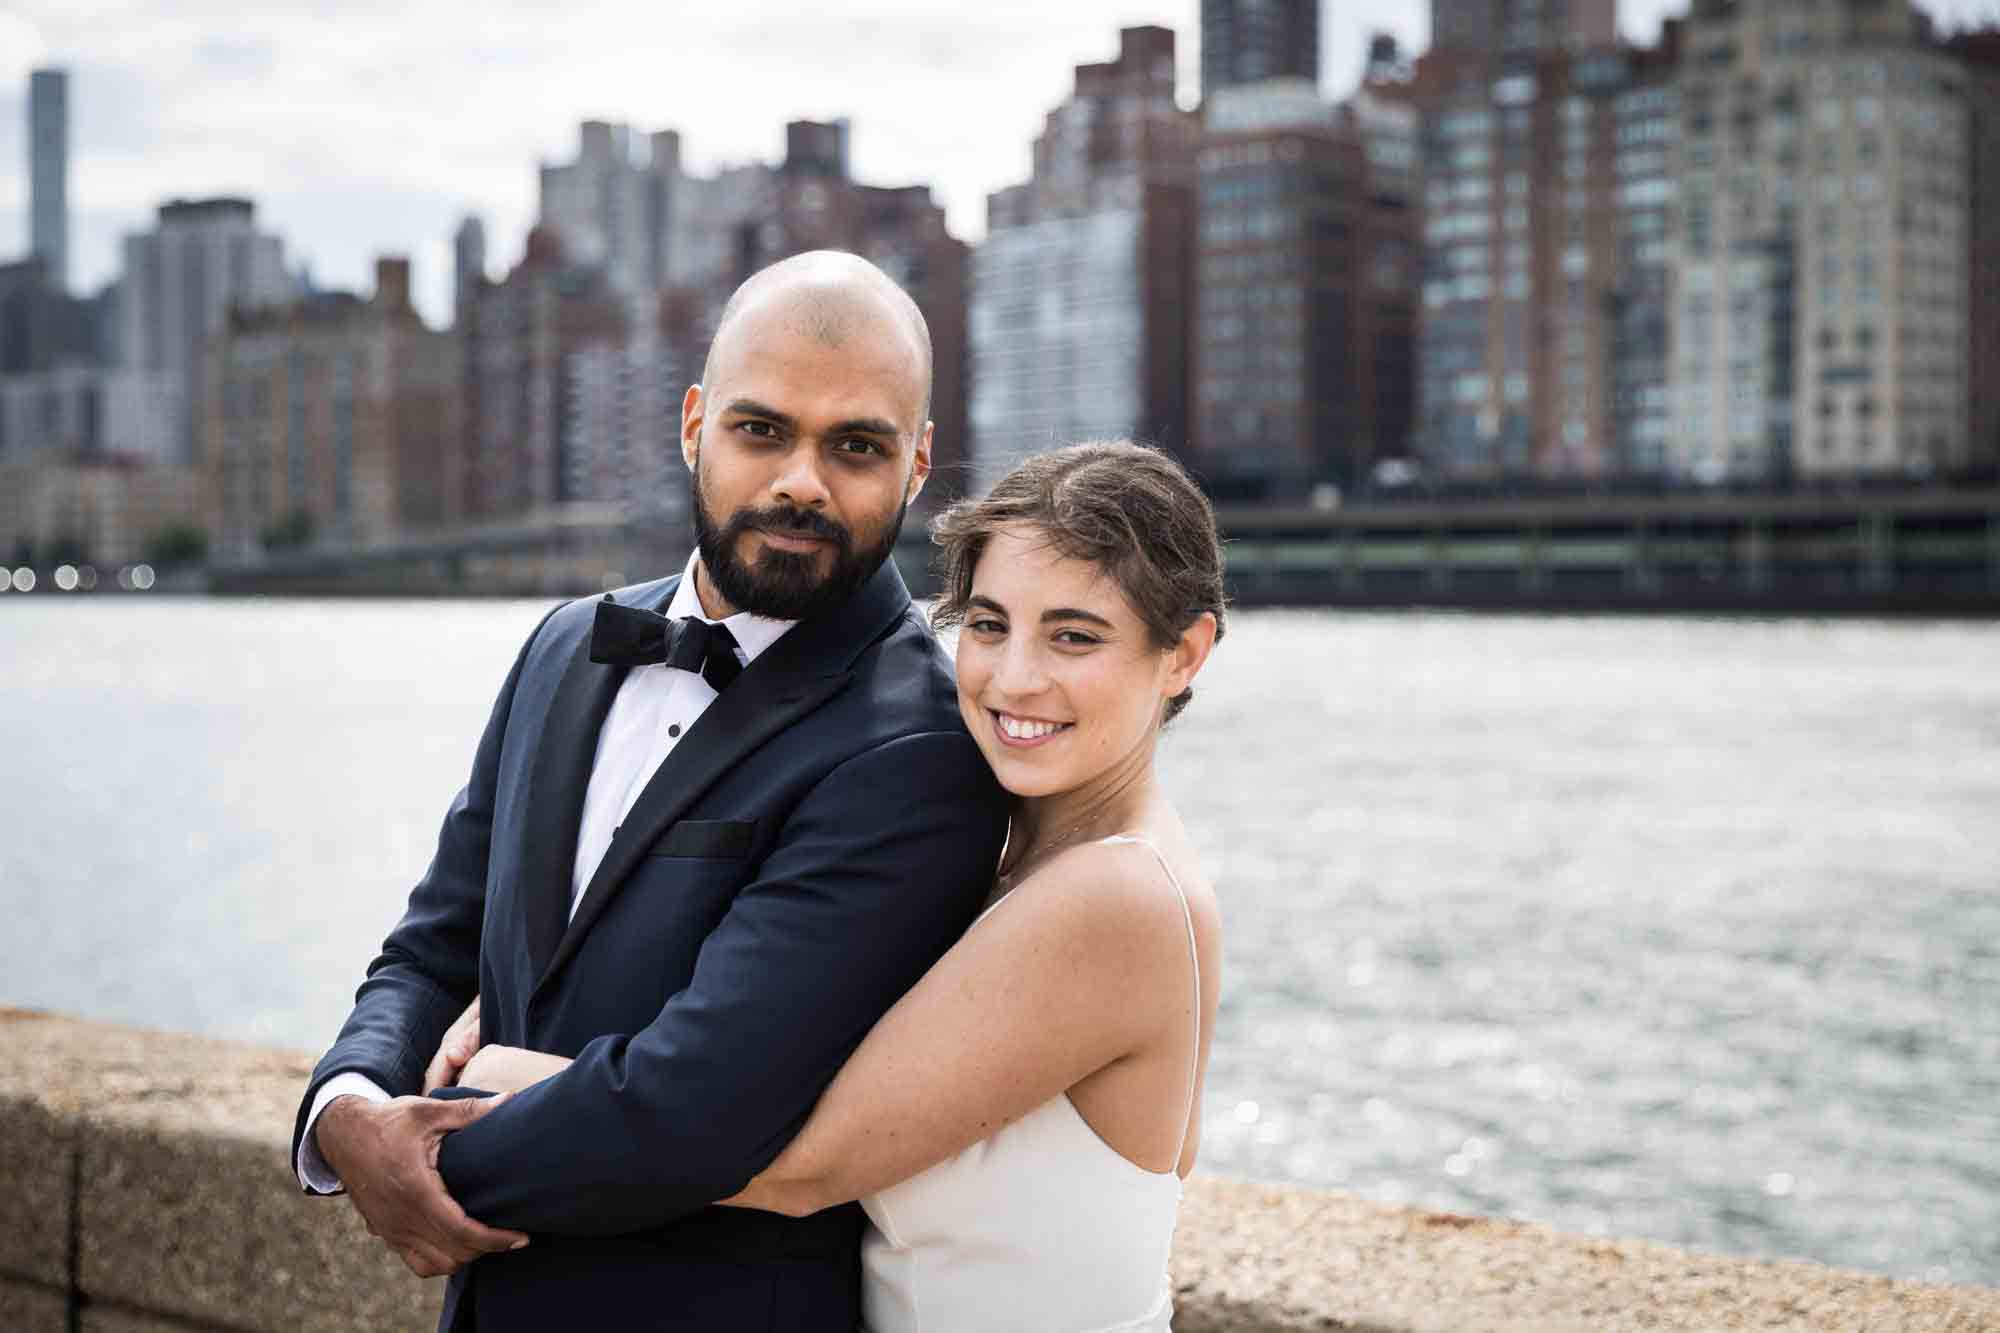 Bride hugging groom from behind in front of NYC skyline on Roosevelt Island